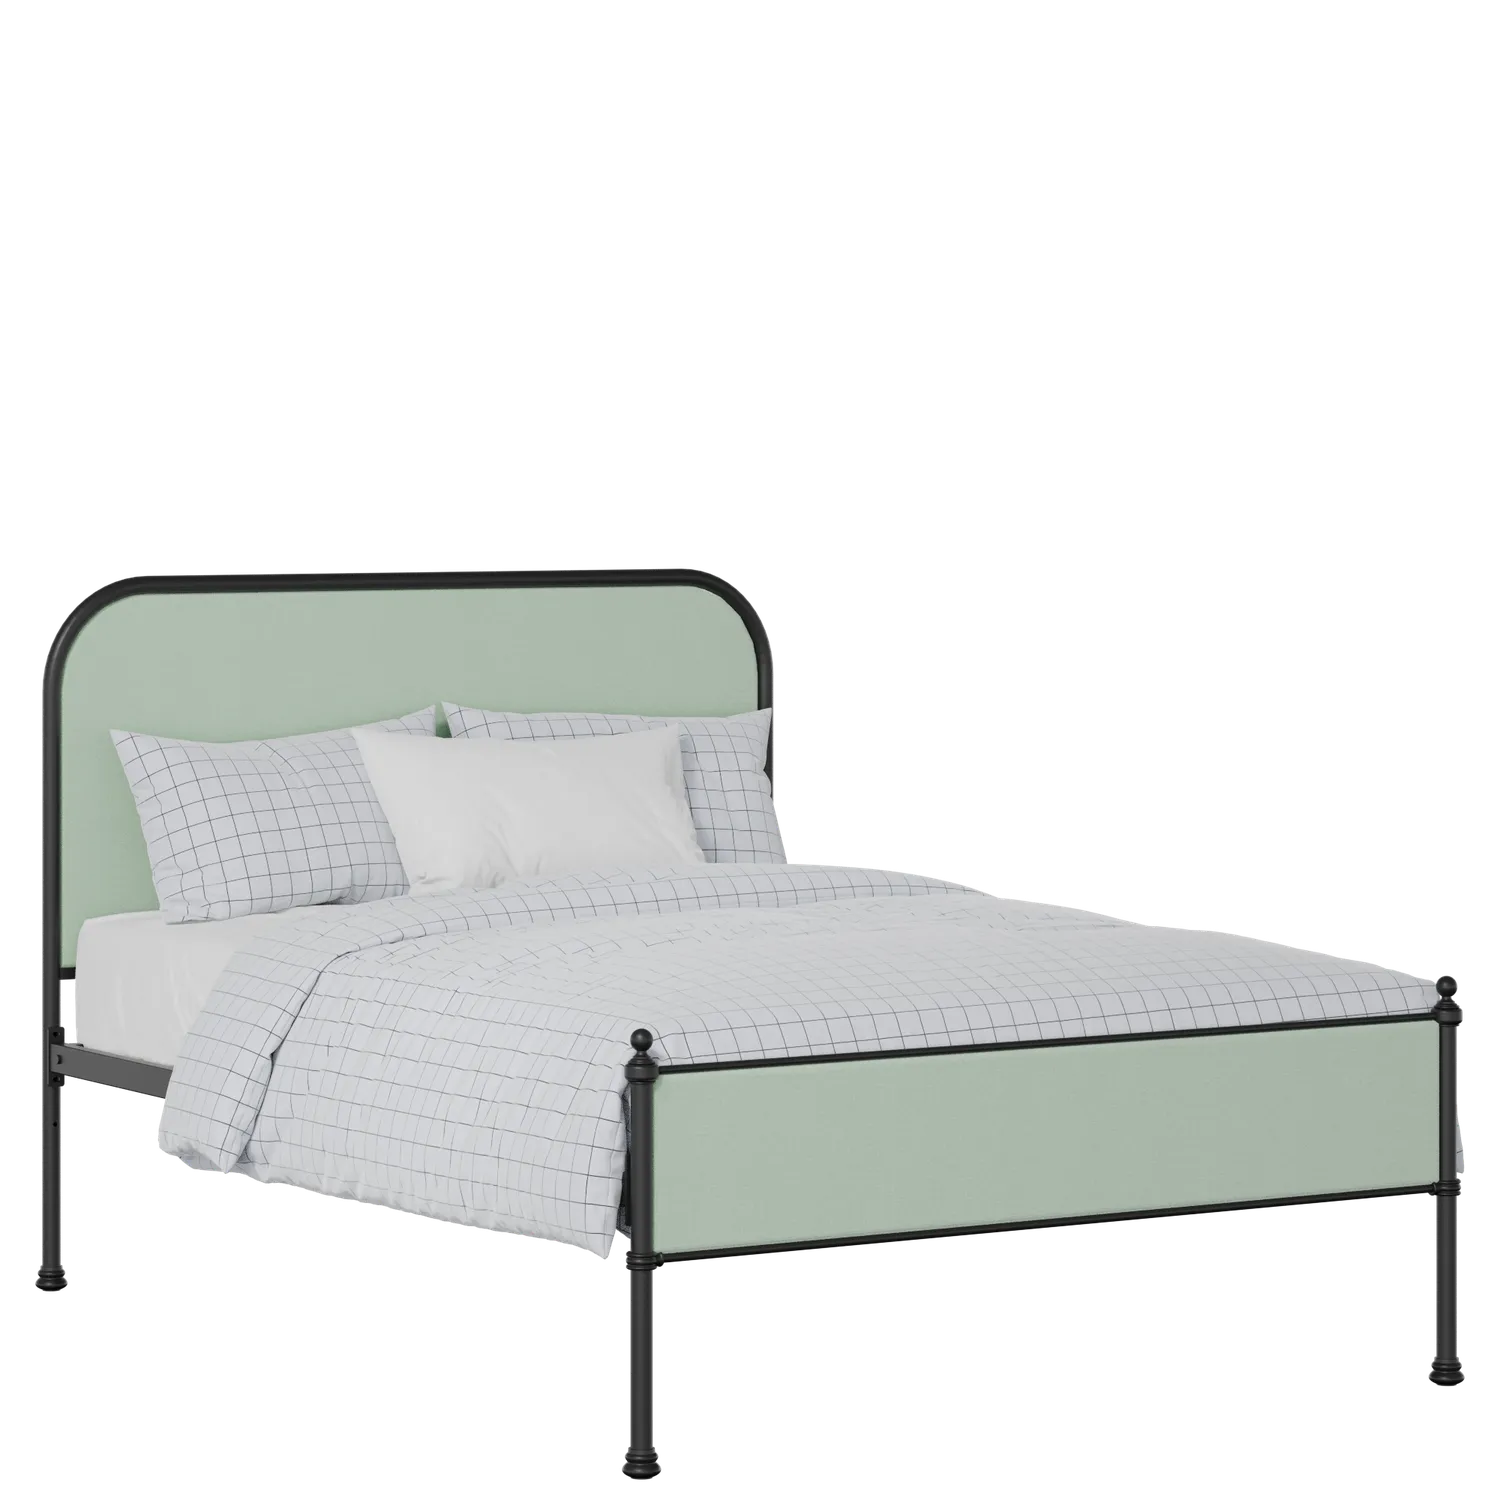 Bray Slim iron/metal upholstered bed in black with mineral fabric